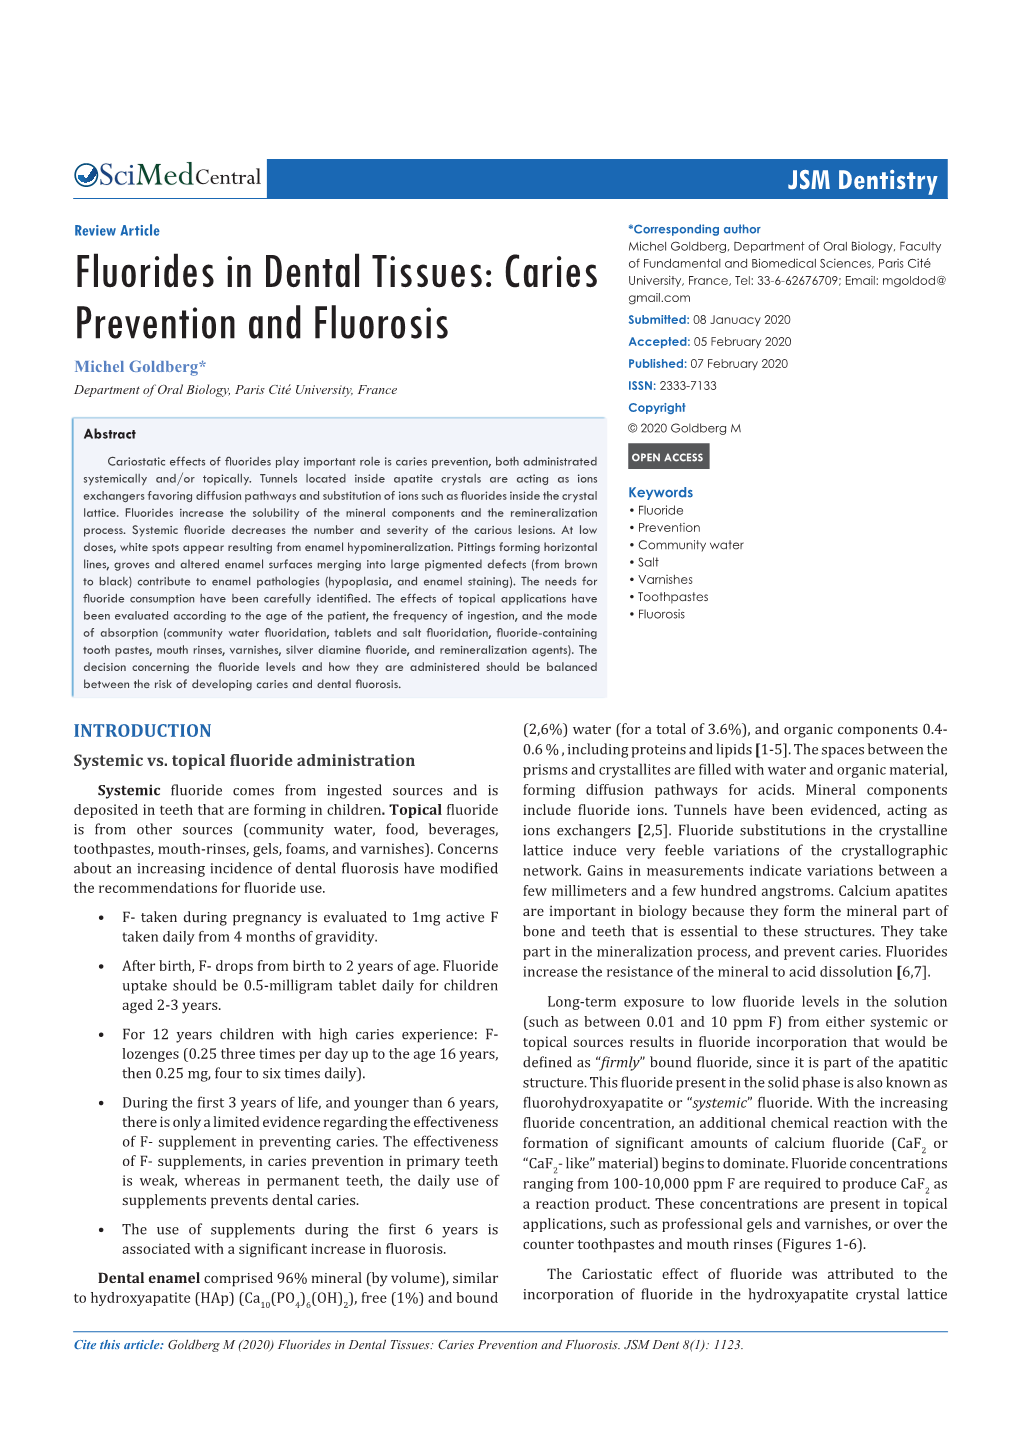 Fluorides in Dental Tissues: Caries Prevention and Fluorosis